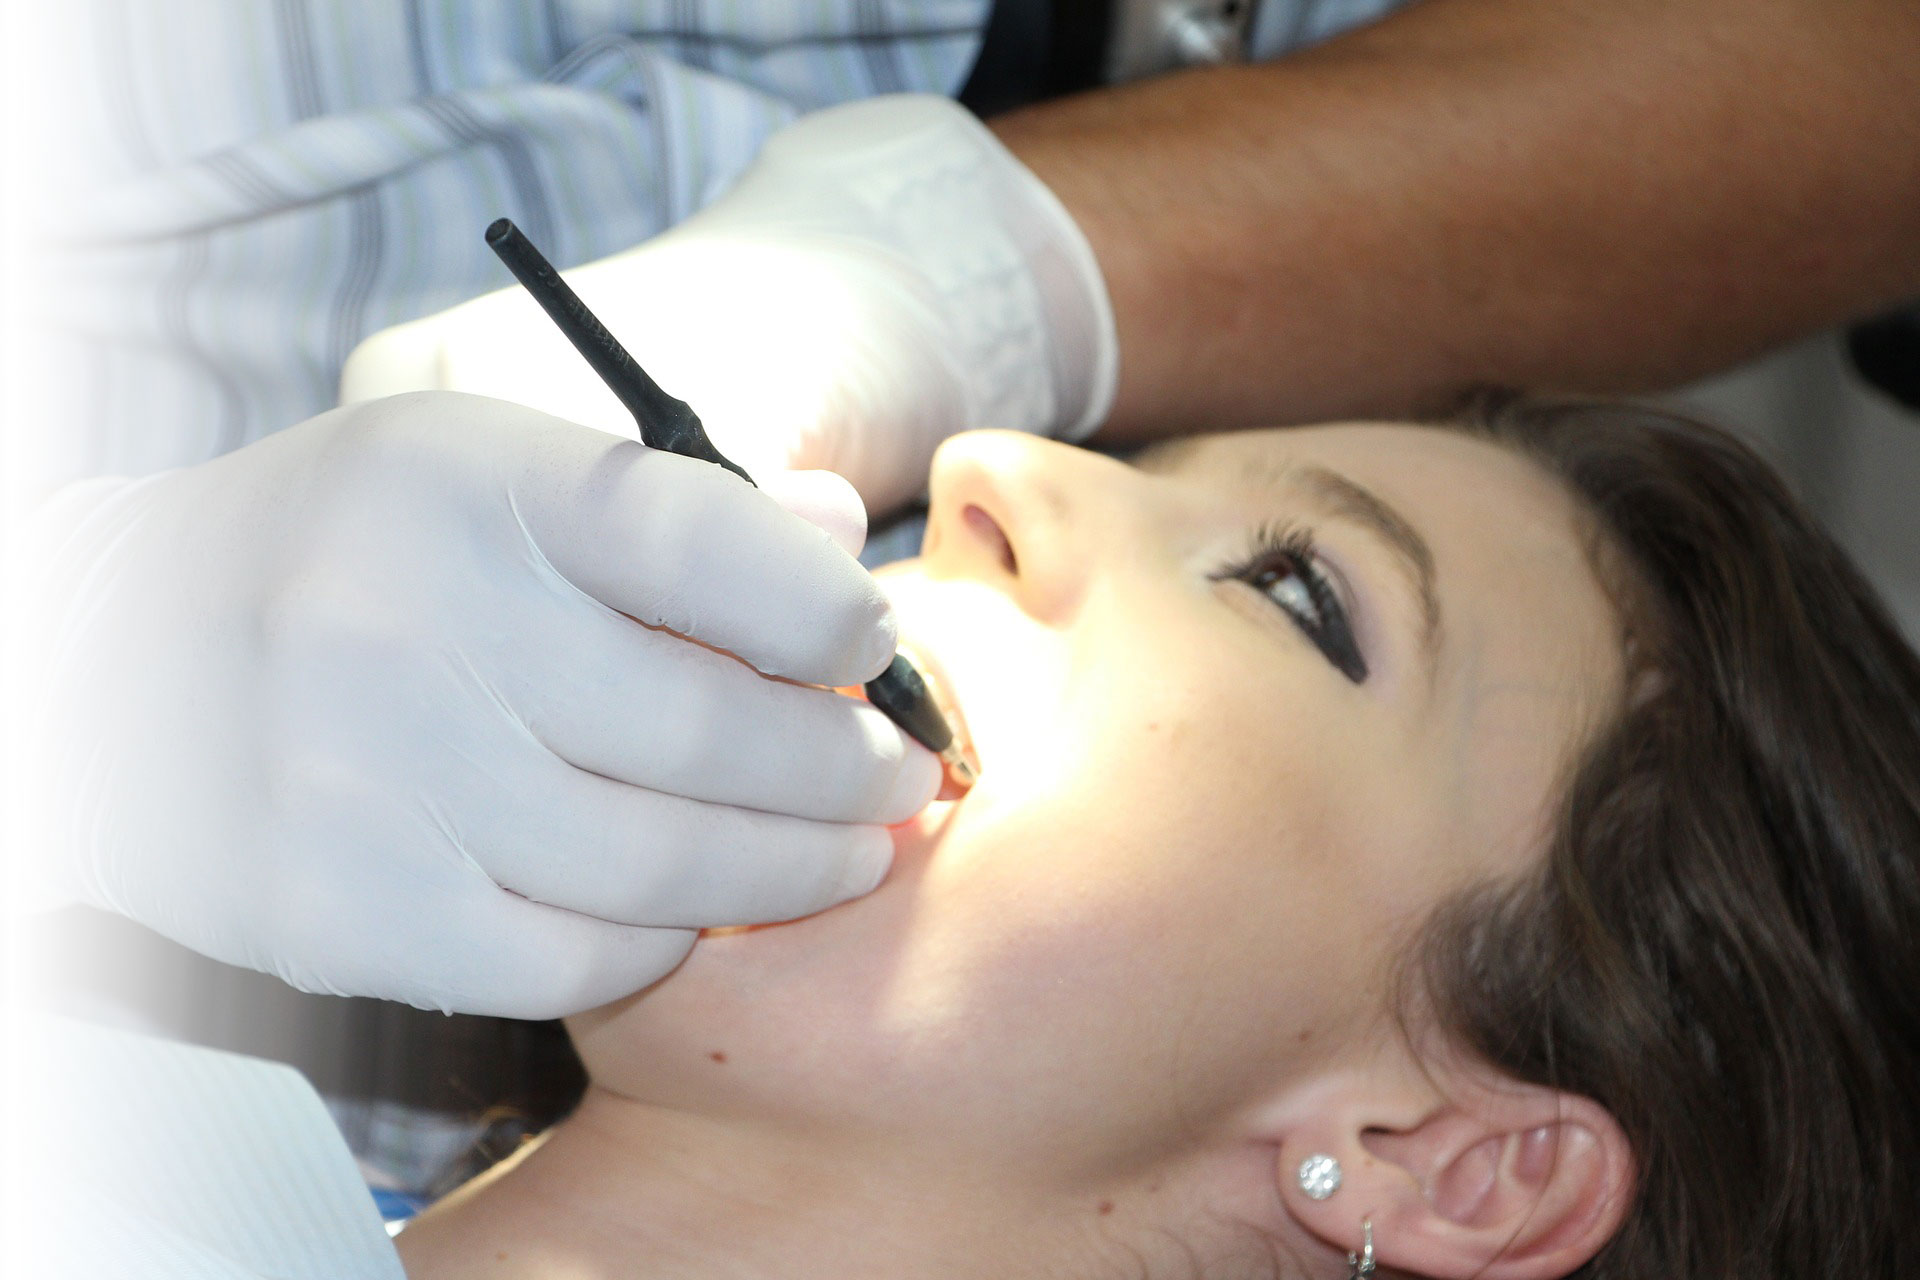 Image of a women undergoing a root canal.